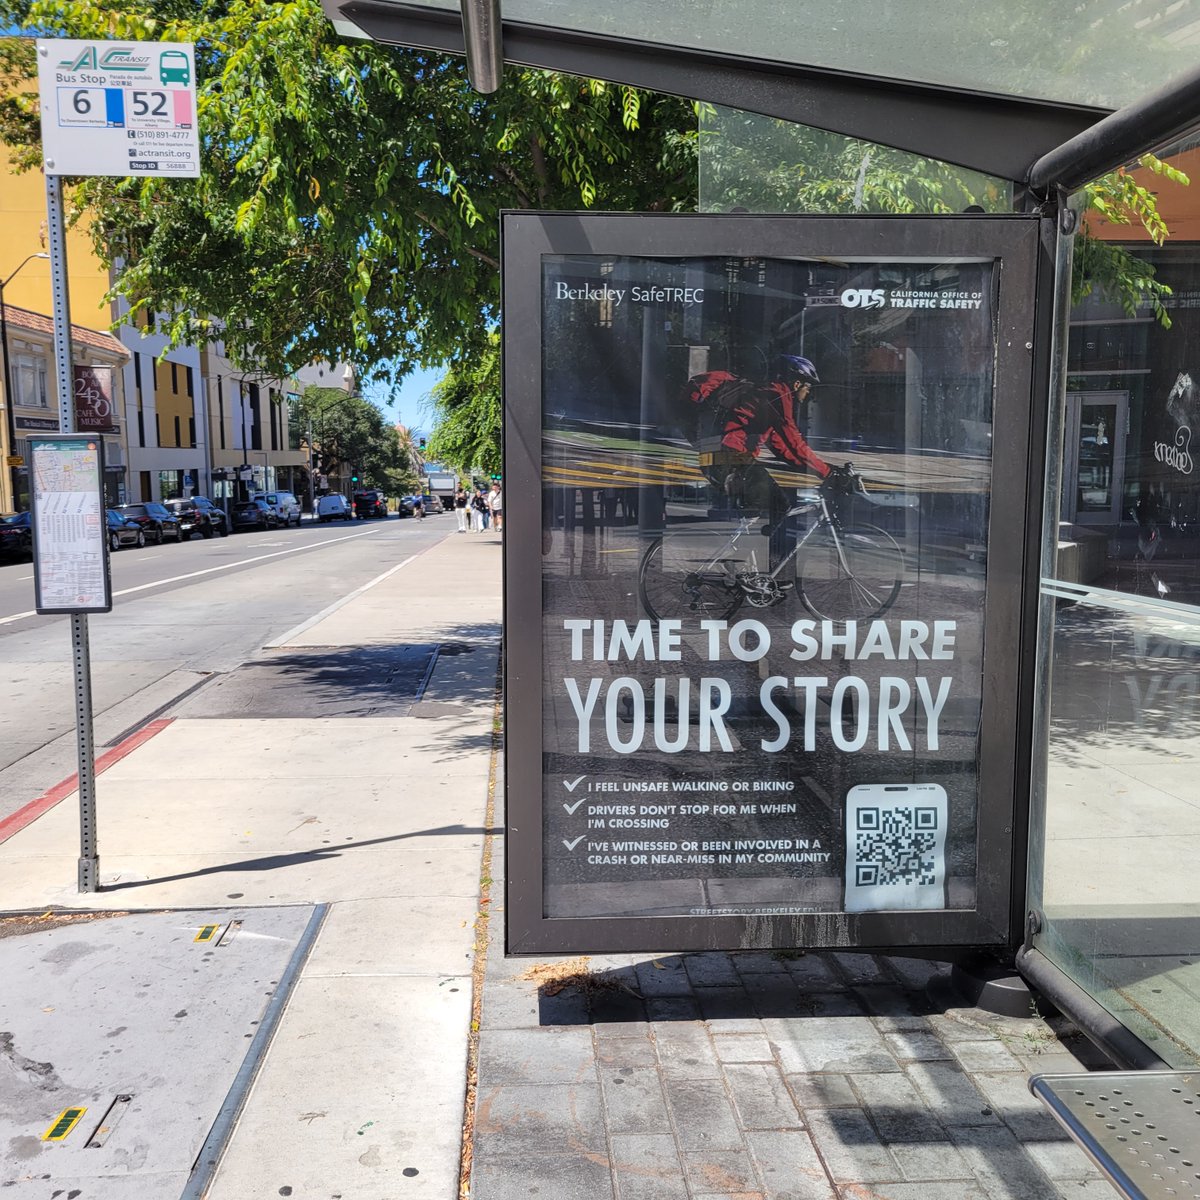 Register now for our next #StreetStory webinar on 4/17: 'I have the data, now what? Part 2' to hear success stories, gain knowledge about packaging #Data, and learn about helpful resources for collecting and analyzing #TransportationSafety data: safetrec.berkeley.edu/news/register-…